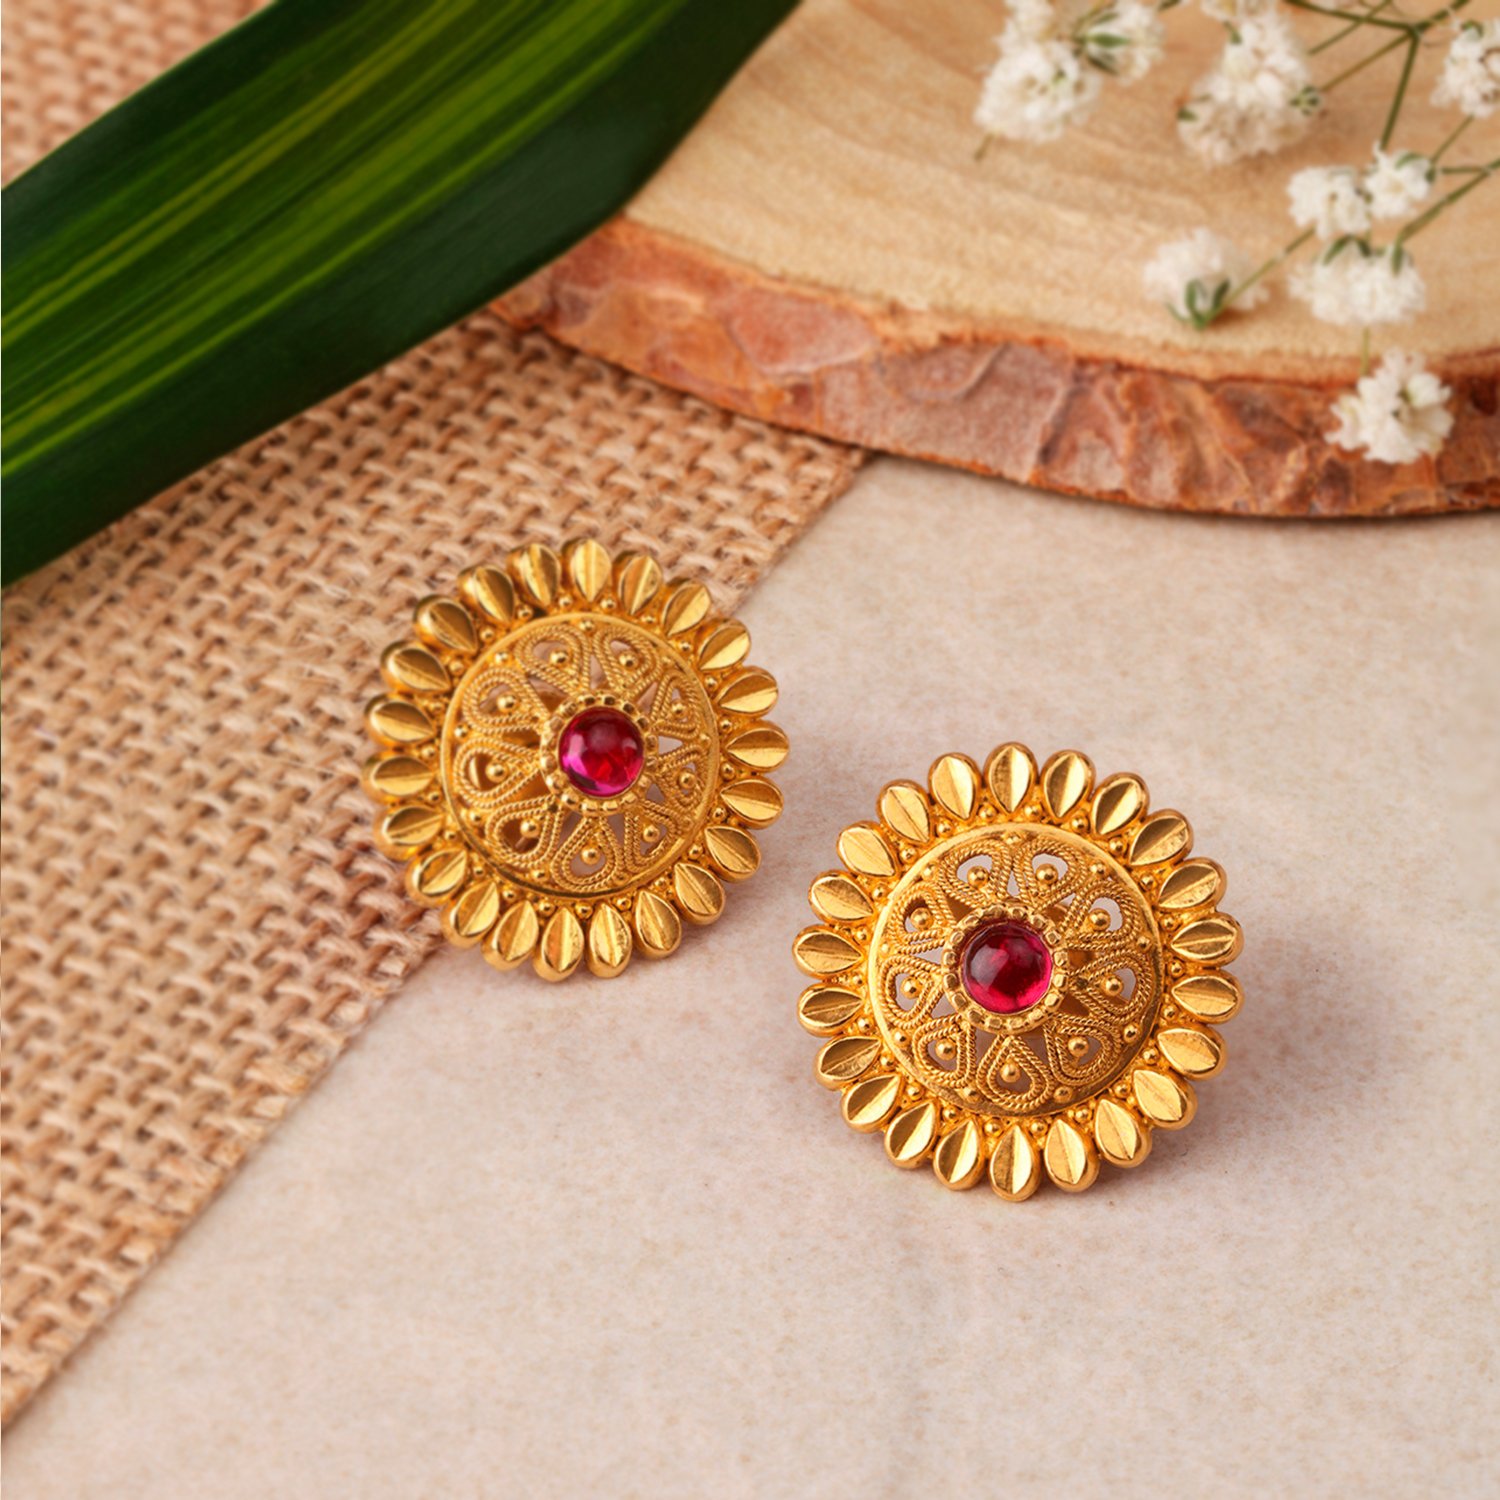 Unveil more than 150 tanishq gold earrings super hot